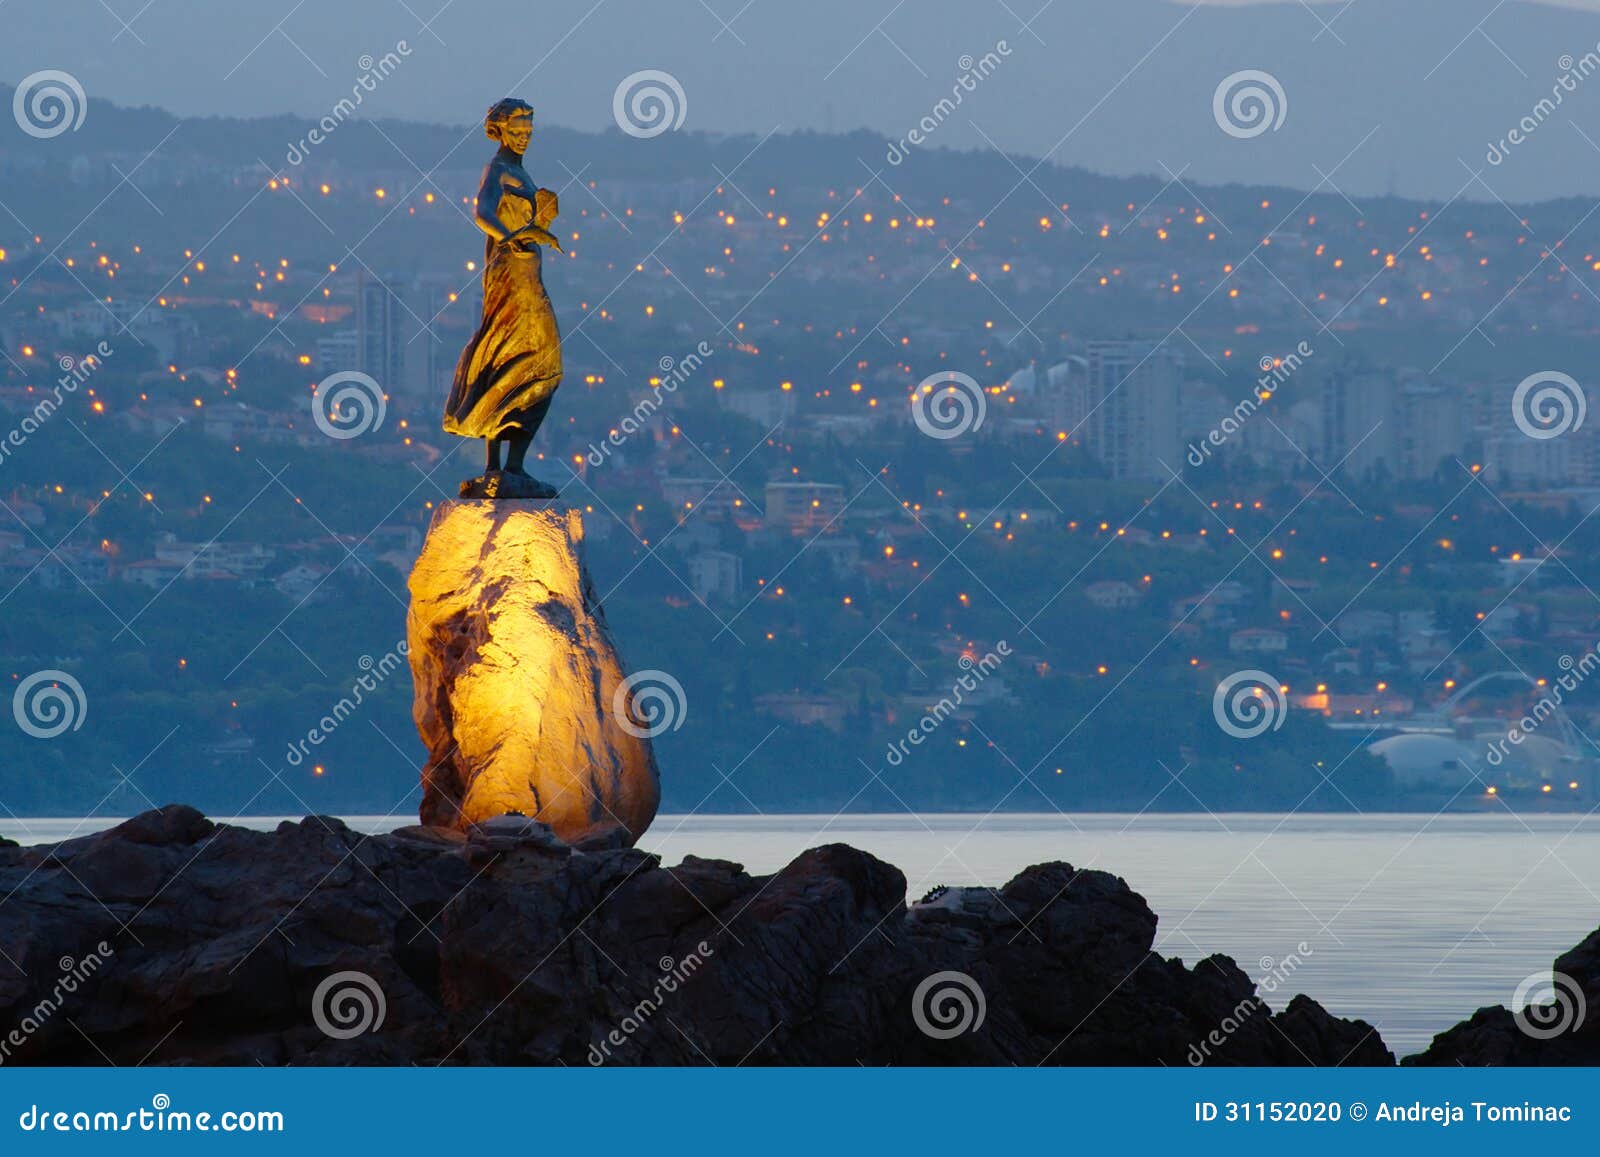 girl with seagull with rijeka in the background